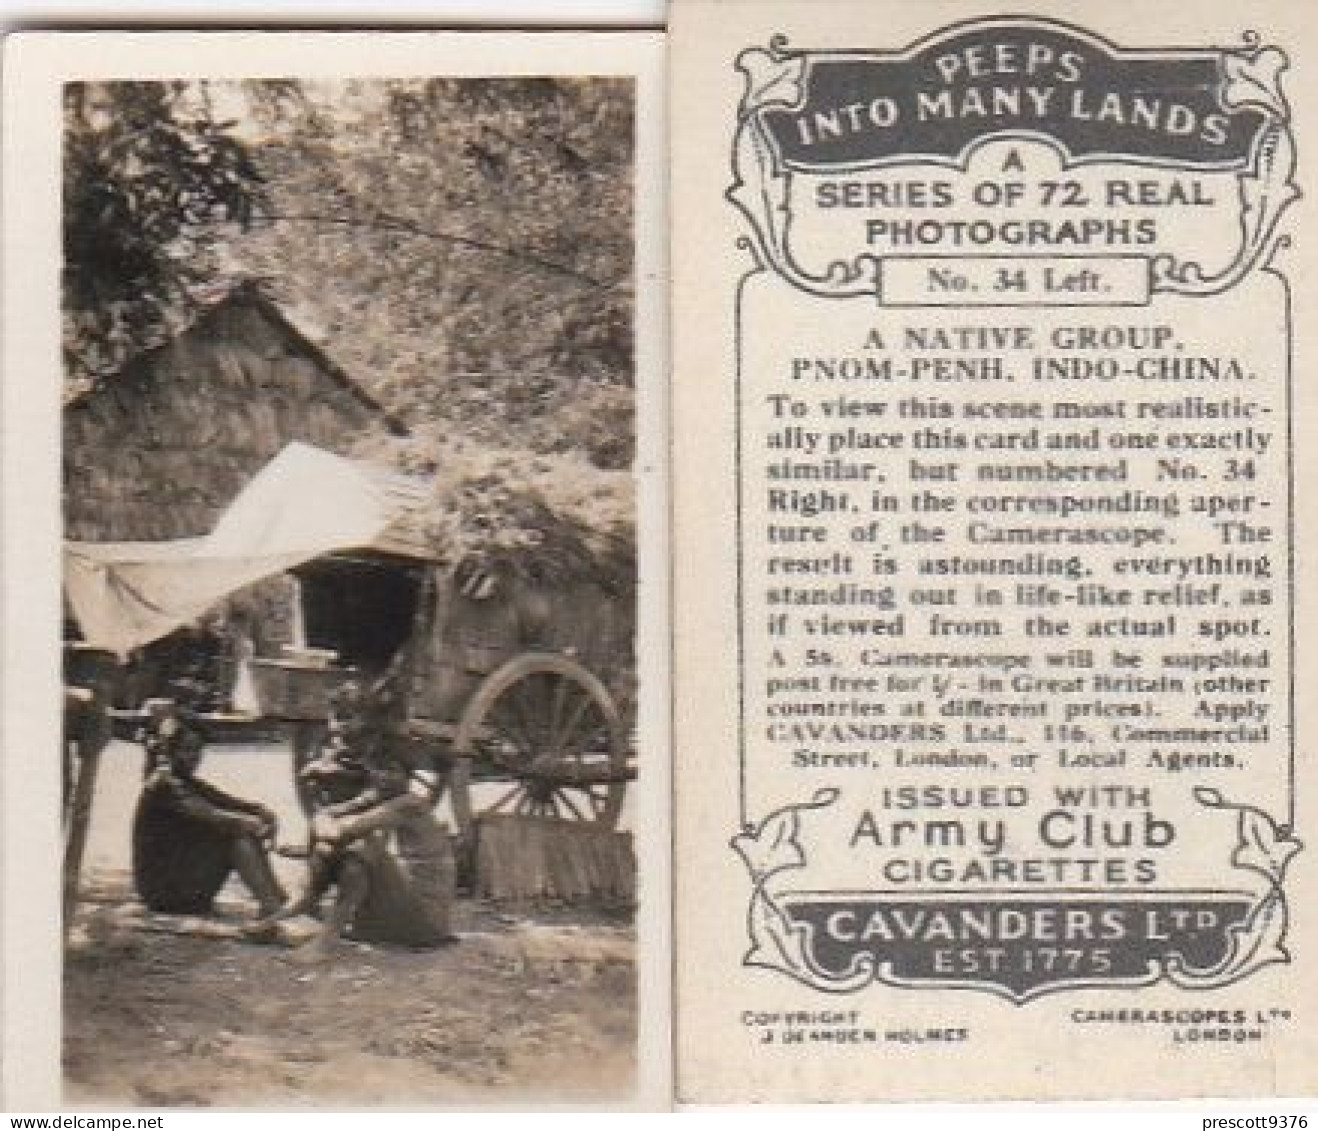 34 Native Group, Pnom Penh, Indo China - PEEPS INTO MANY LANDS A 1927 - Cavenders RP Stereoscope Cards 3x6cm - Visionneuses Stéréoscopiques